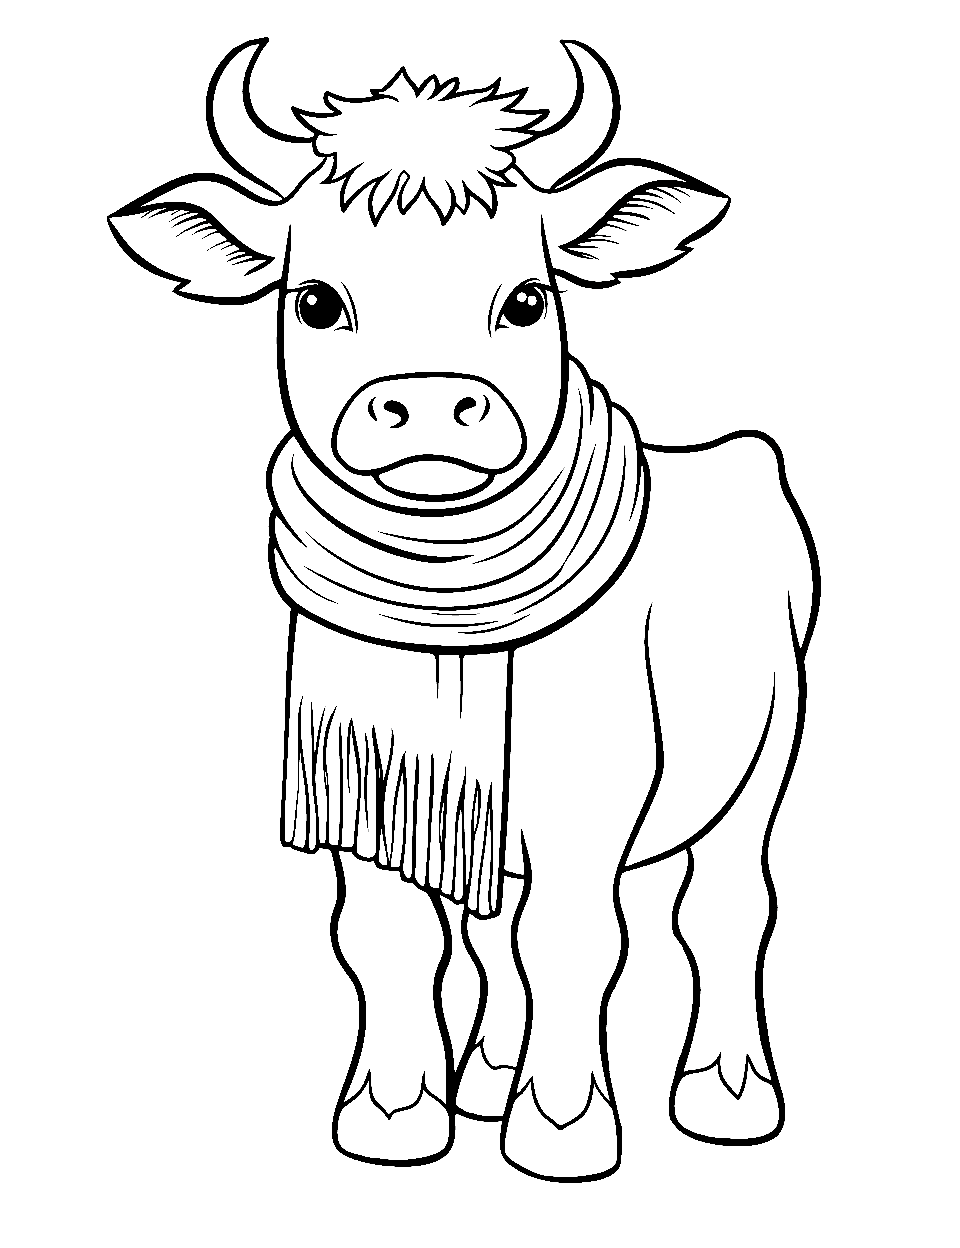 Winter Cow Coloring Page - A cow warmly wrapped in a scarf, standing.